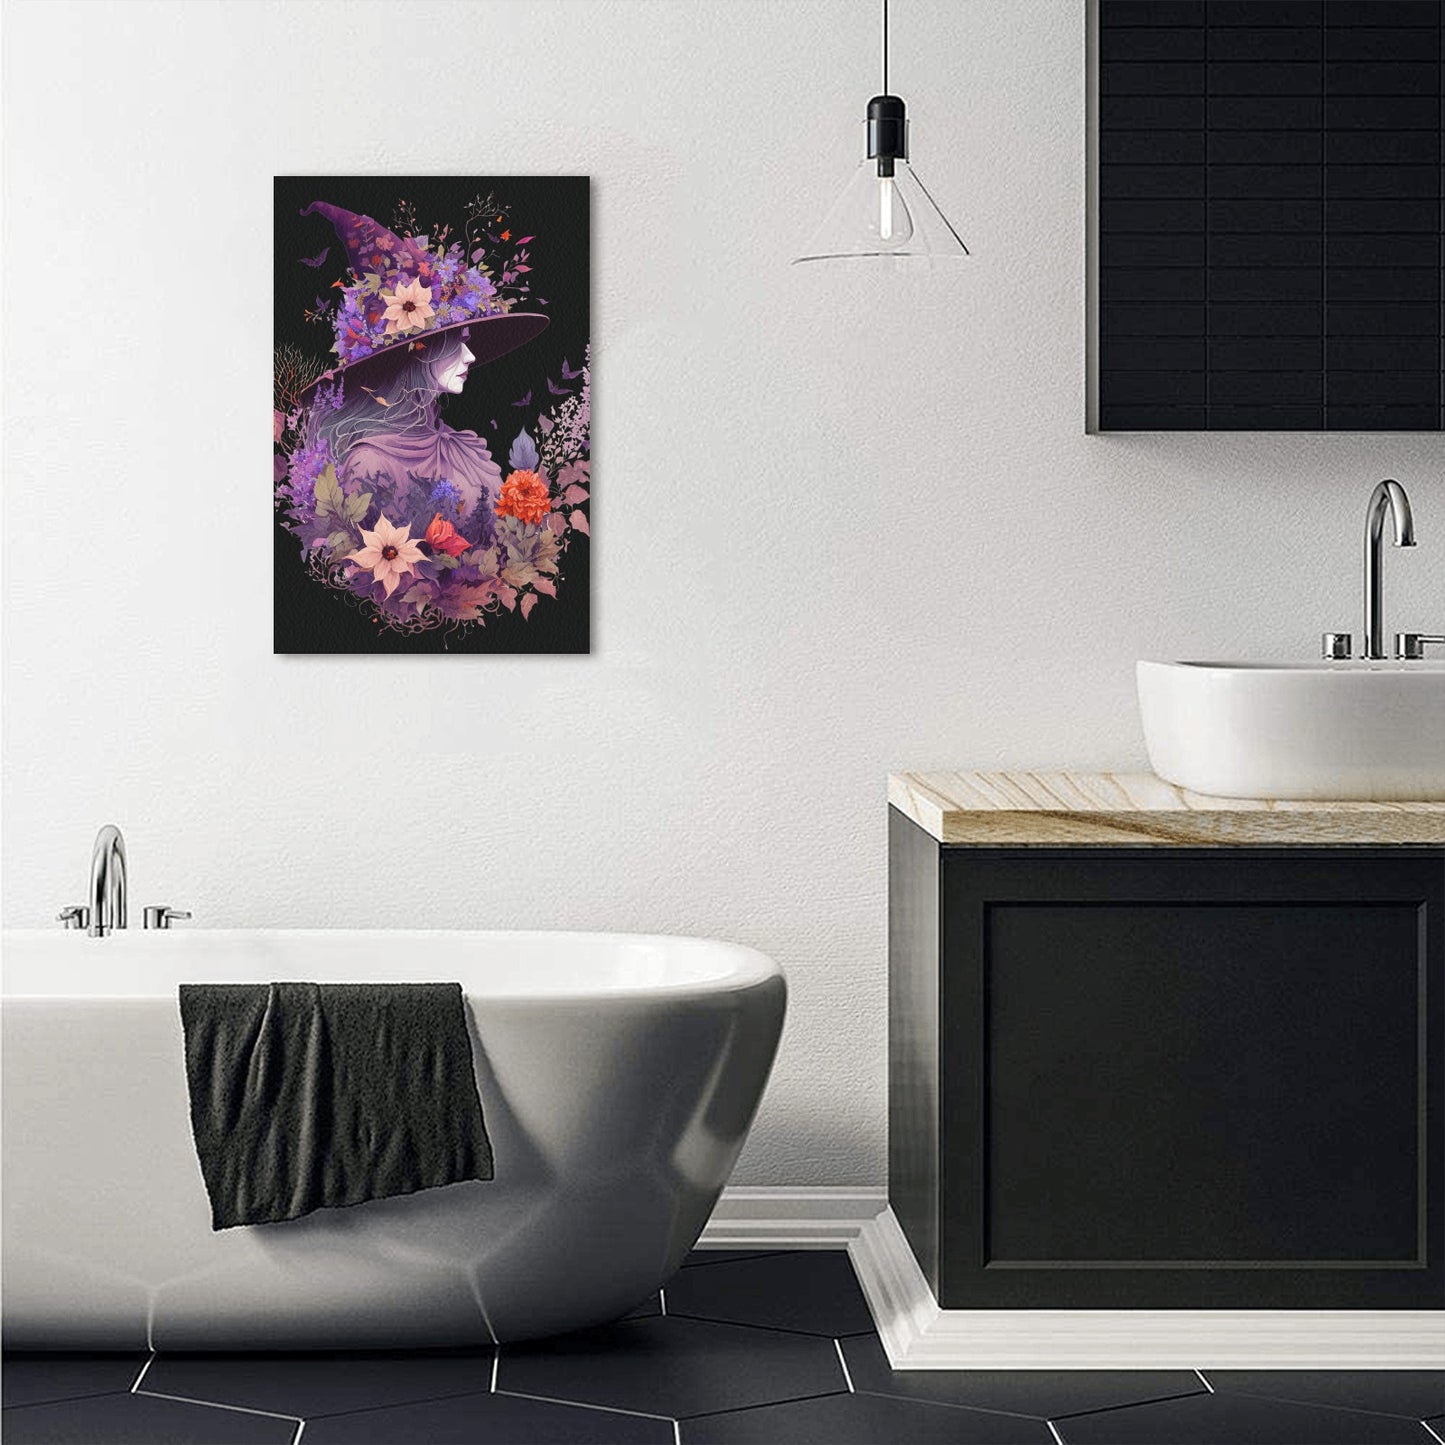 Witch Frame Canvas Print